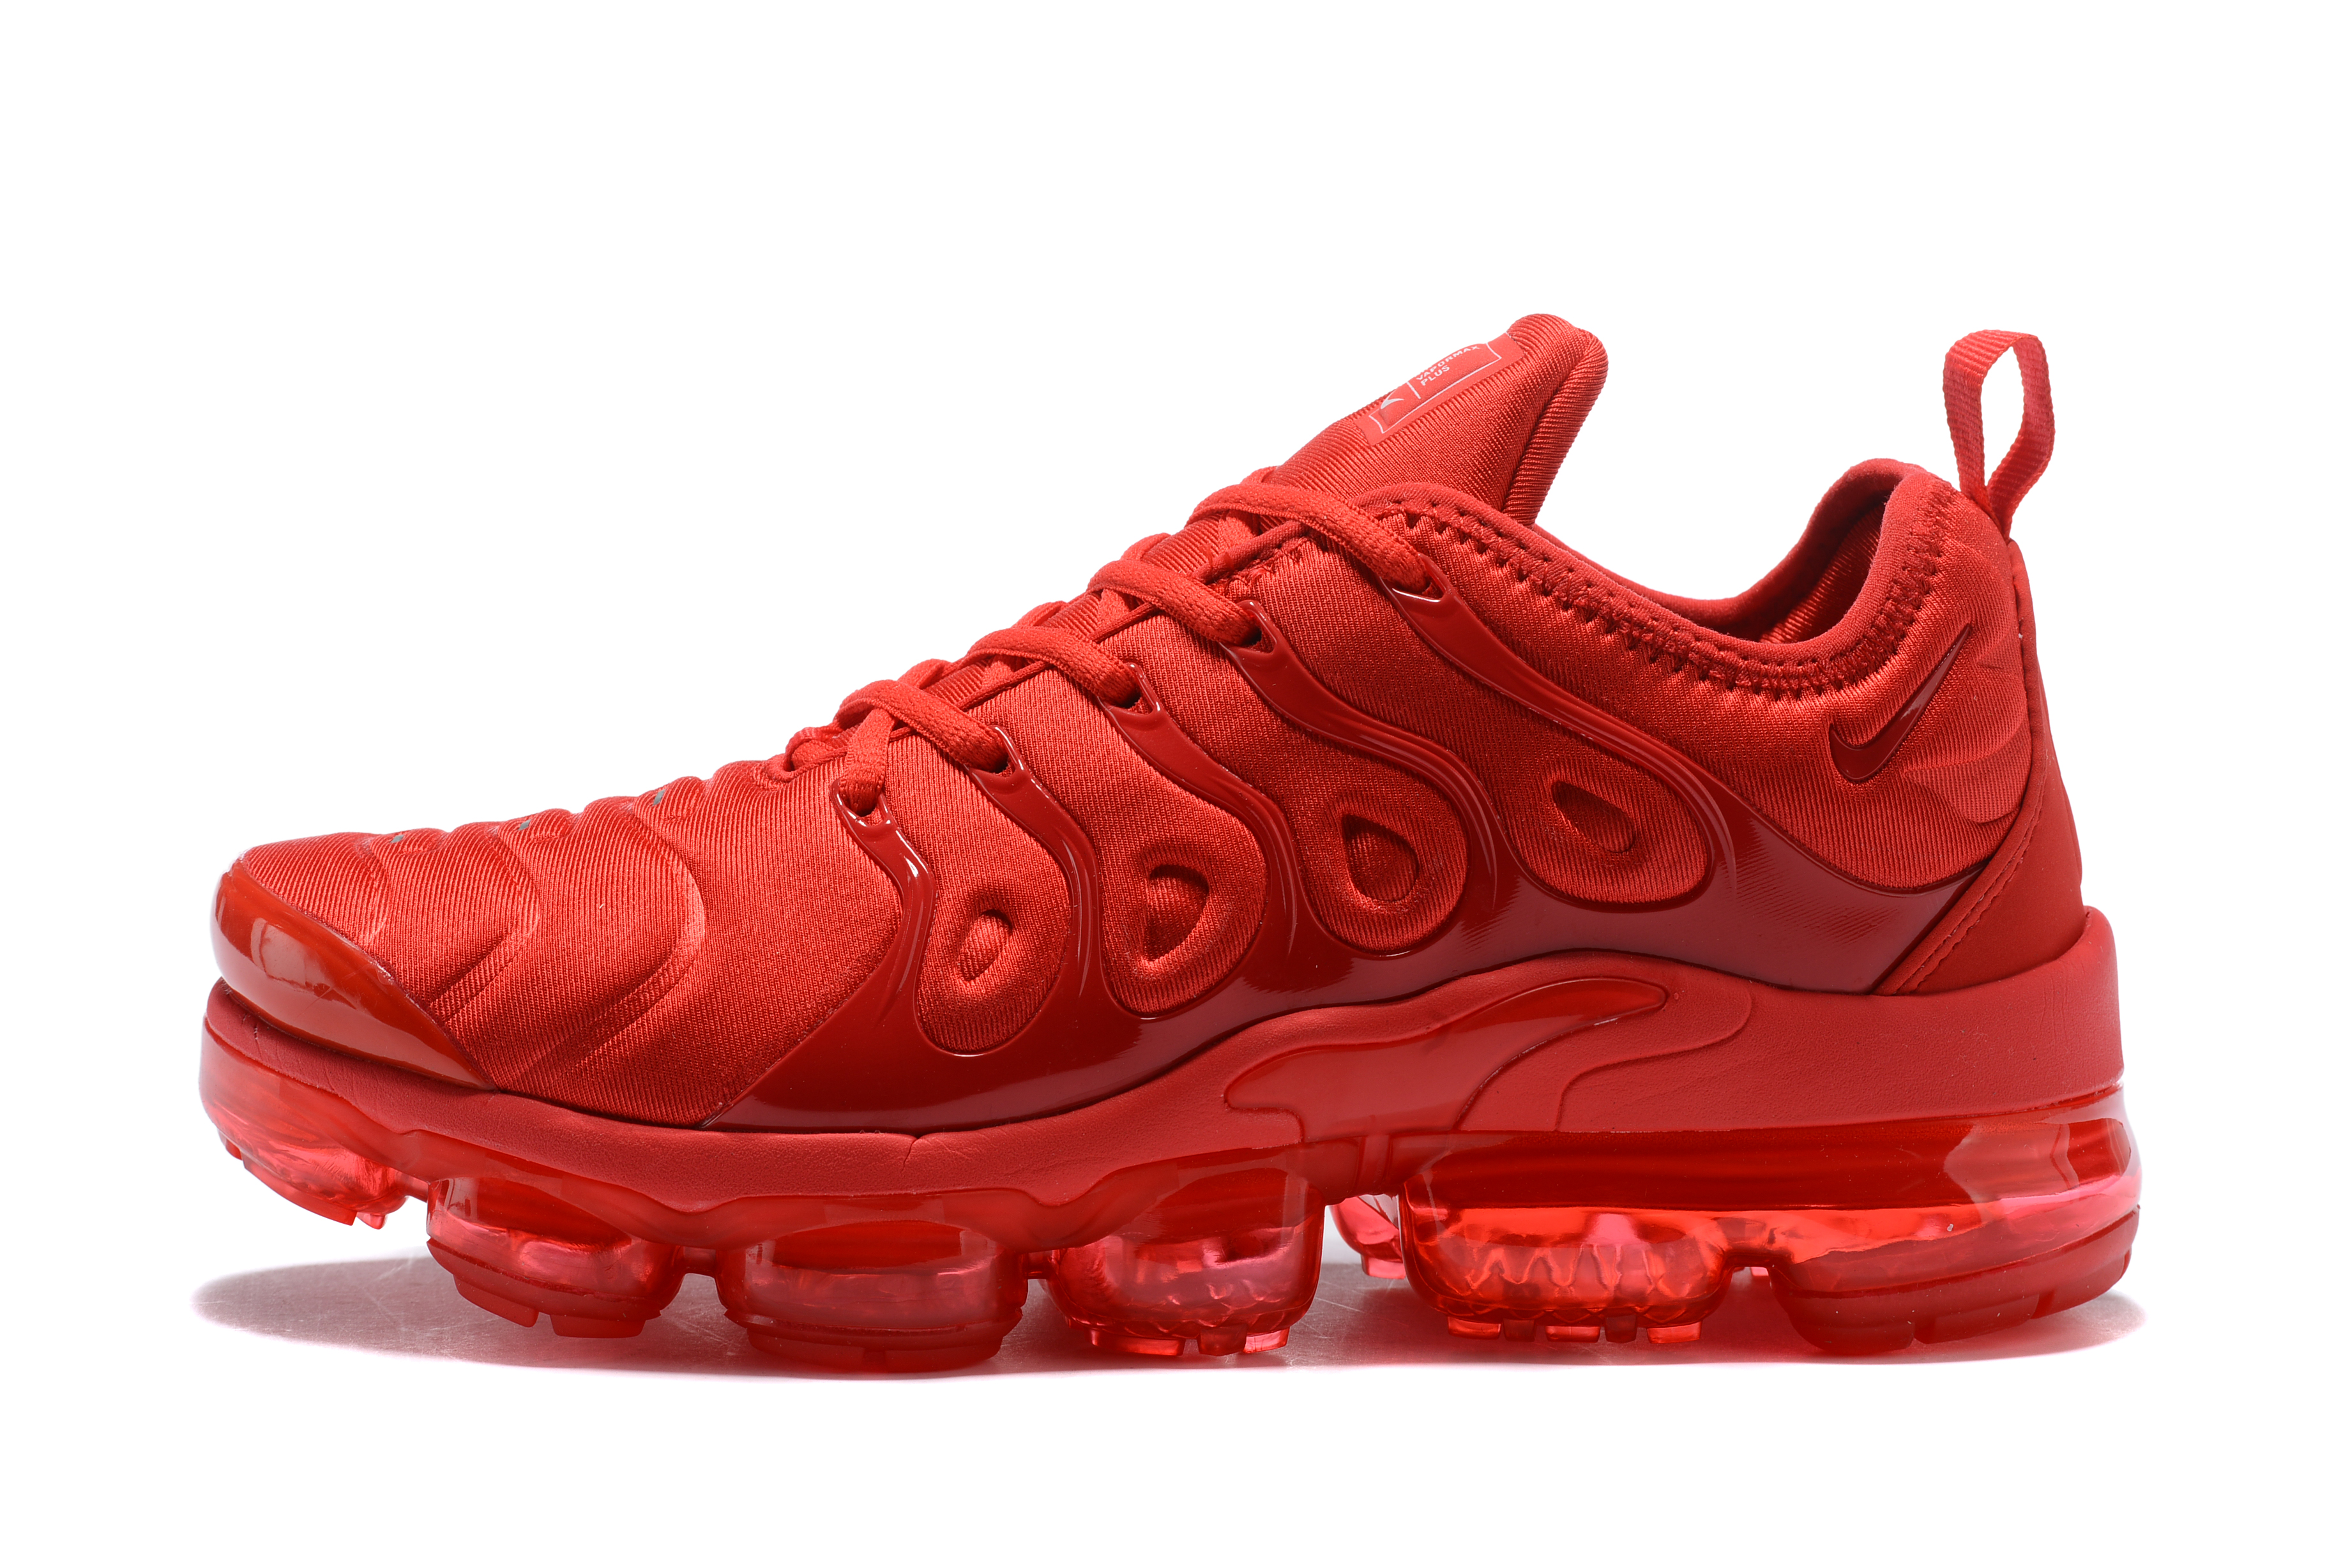 Women 2018 Nike Air Max TN Plus All Red Shoes